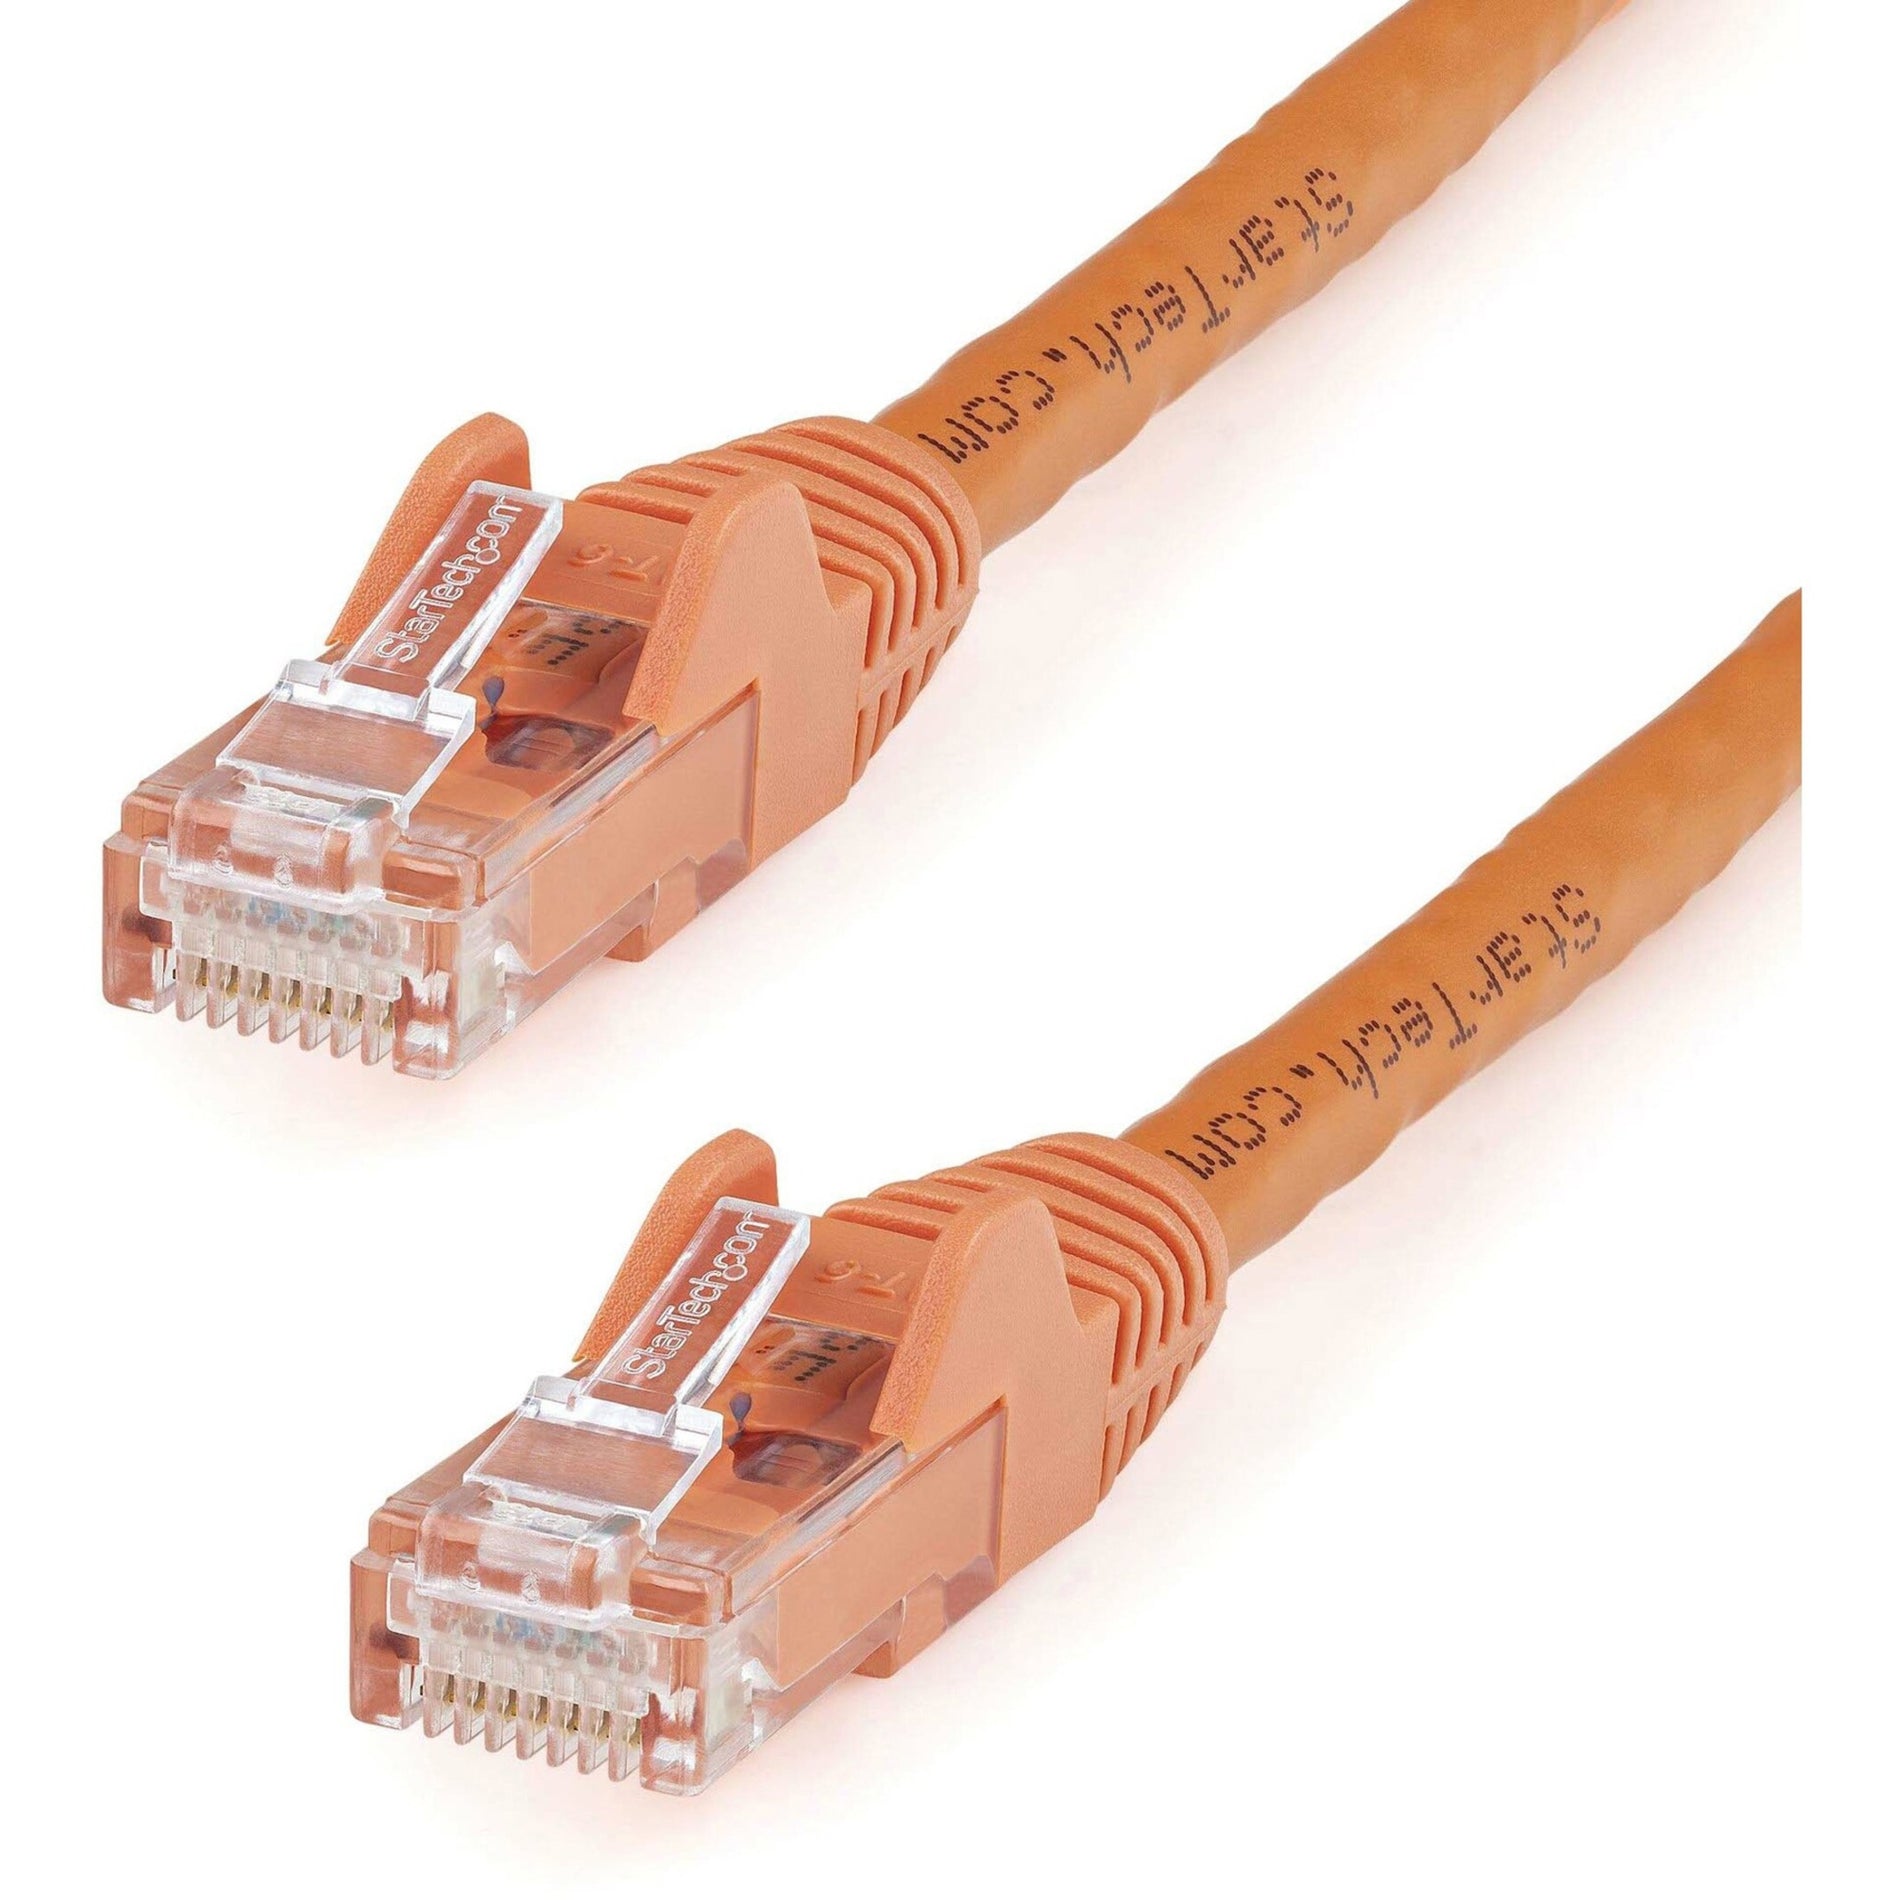 StarTech.com N6PATCH10OR 10 ft Orange Snagless Cat6 UTP Patch Cable, 10 Gbit/s Data Transfer Rate, Lifetime Warranty